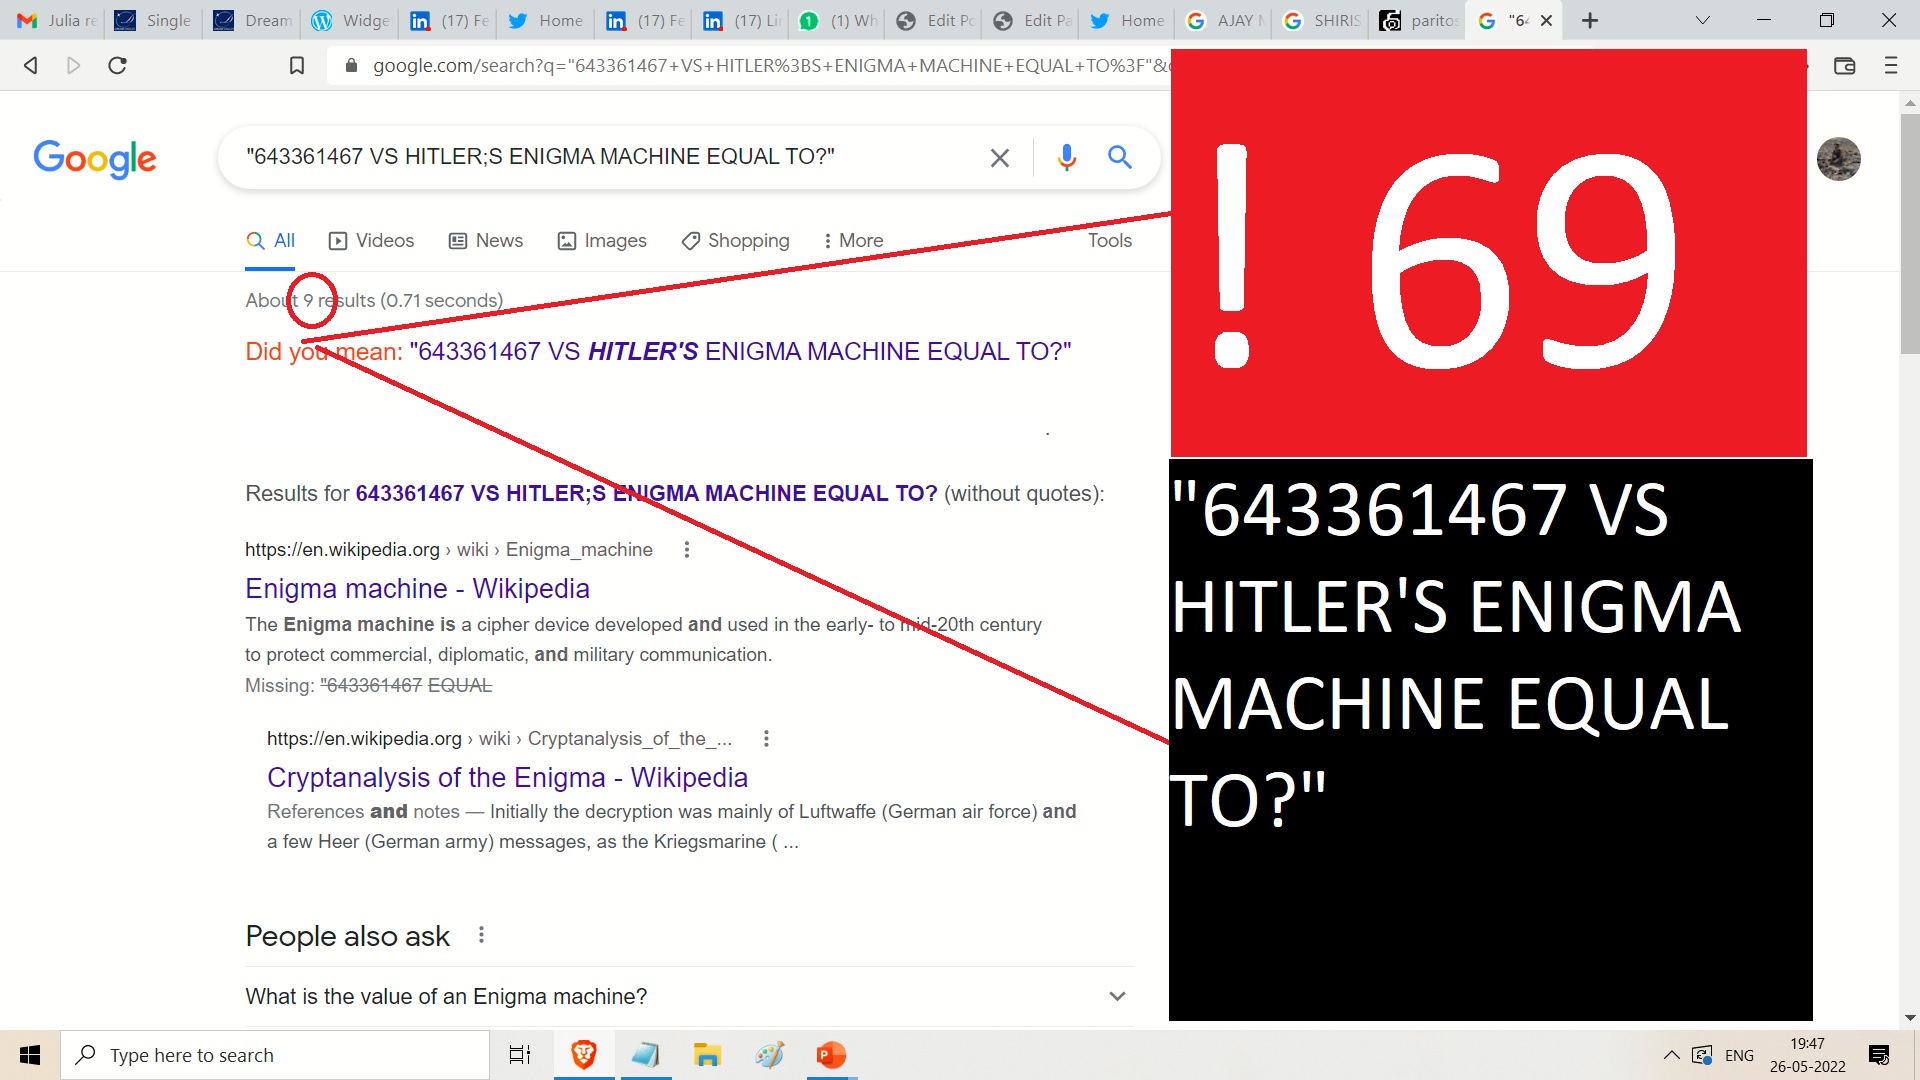 643361467 VS HITLER;S ENIGMA MACHINE EQUAL TO